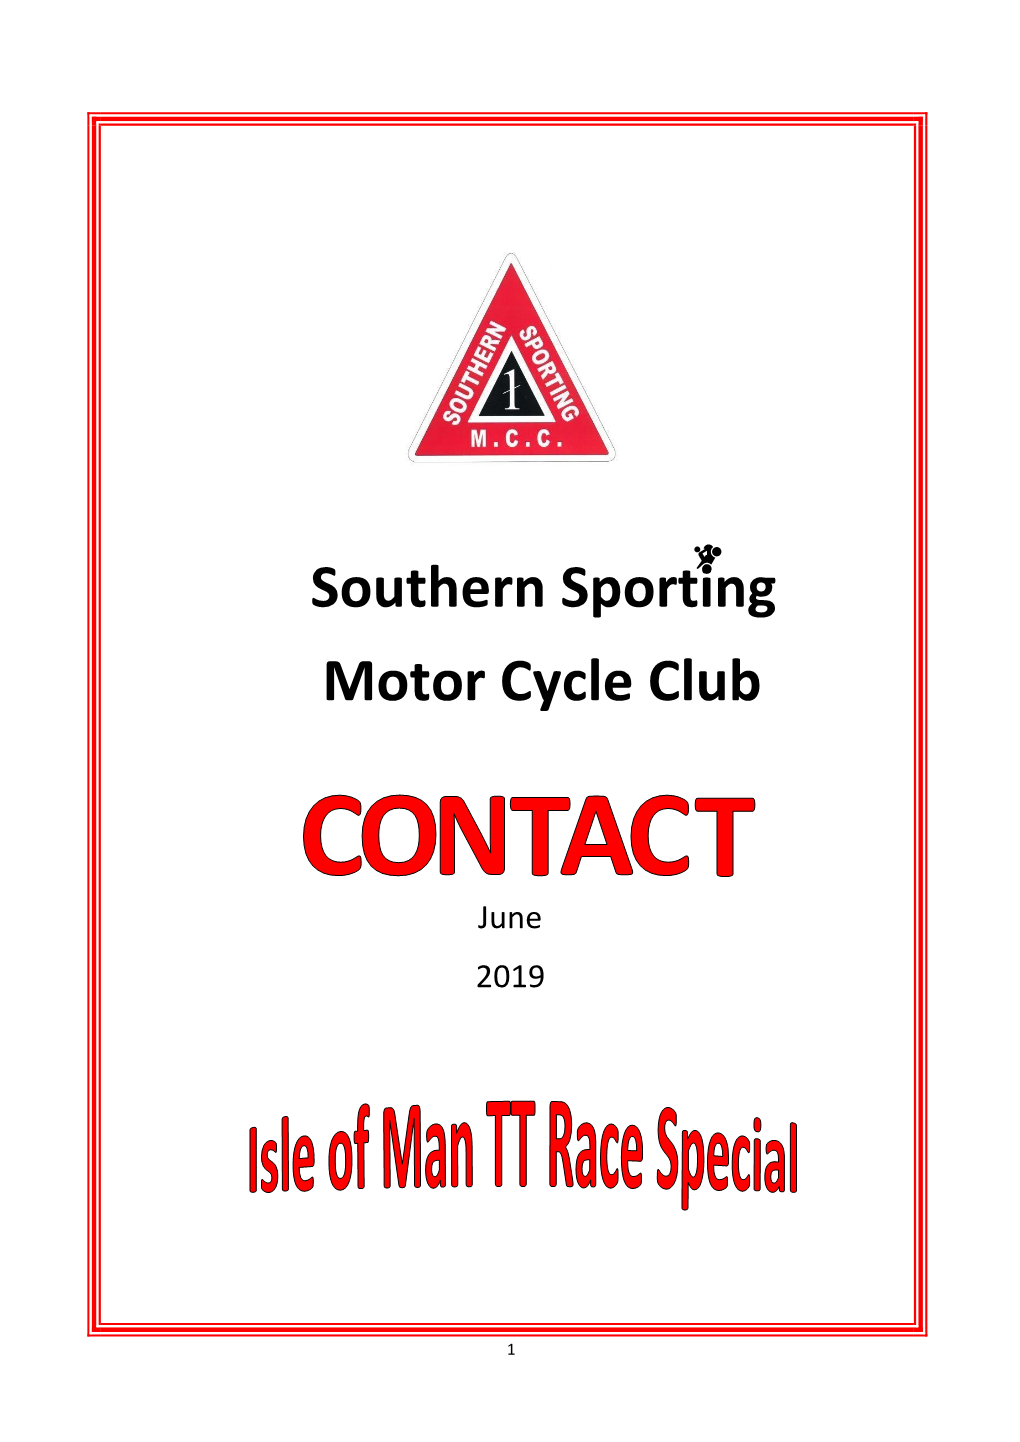 Southern Sporting Motor Cycle Club